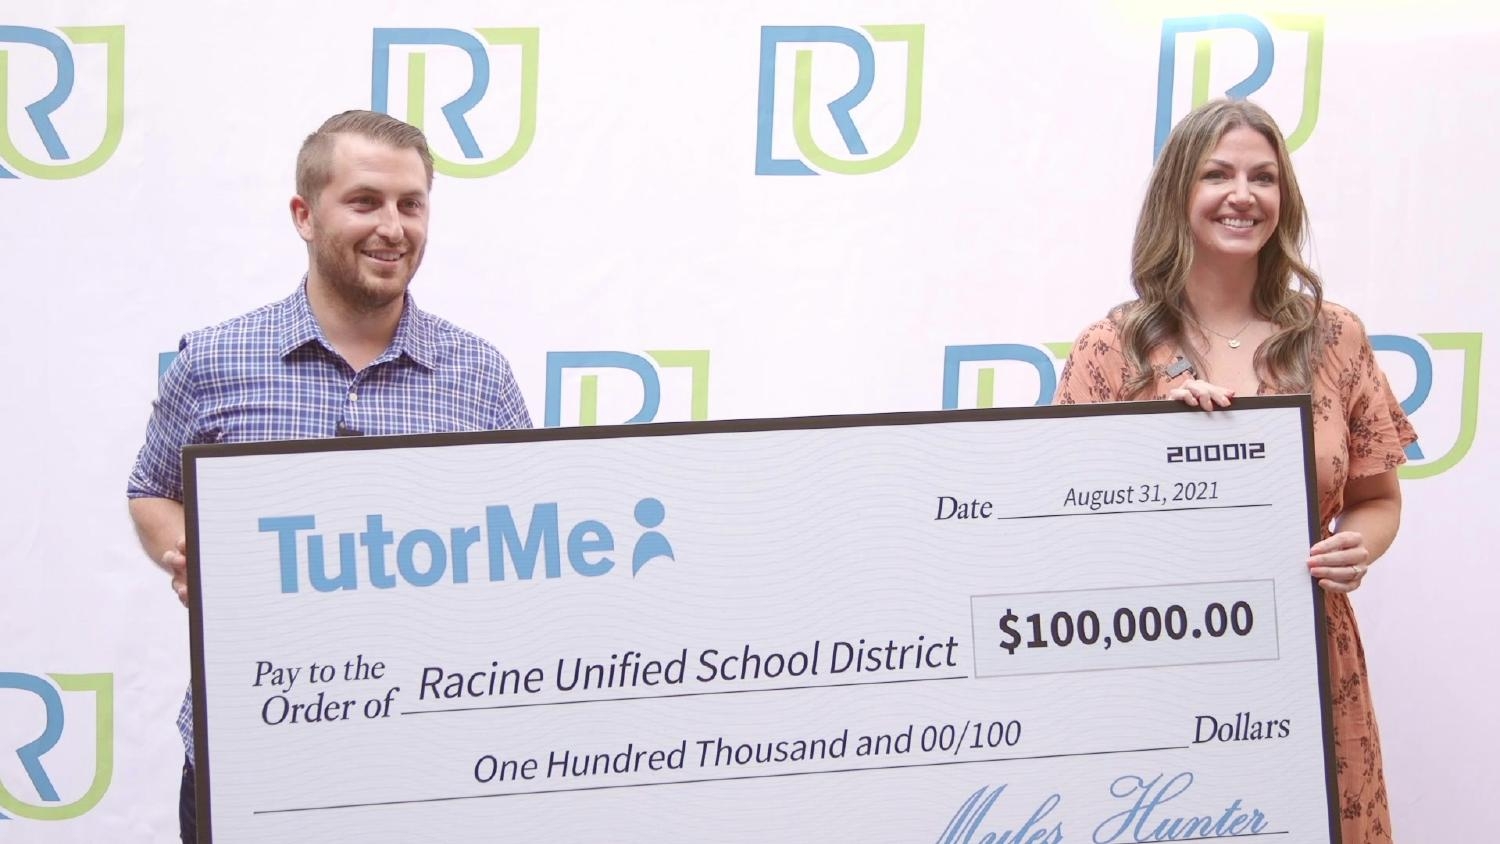 Co-Founder & CEO Myles Hunter presenting $100,000 in online tutoring to Racine Unified School District.